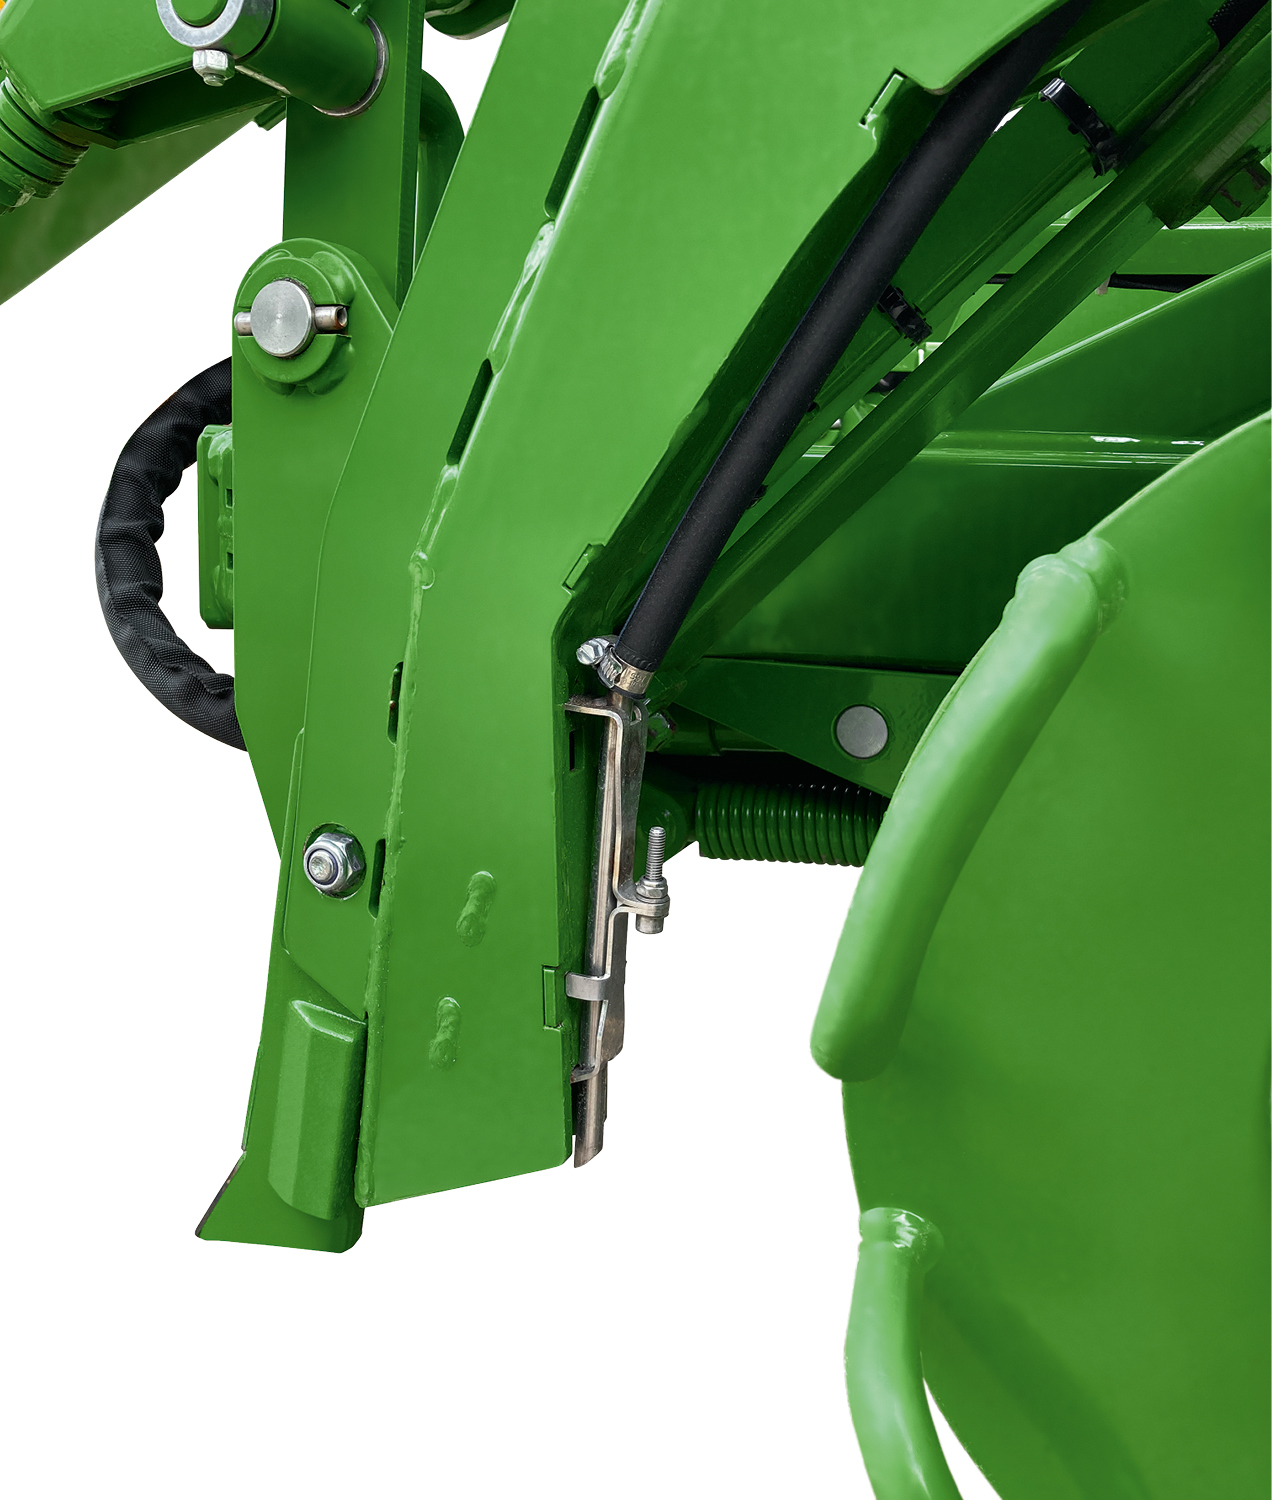 The injection pipe on the coulter ensures precise placement of the liquid fertiliser in the seed furrow. 